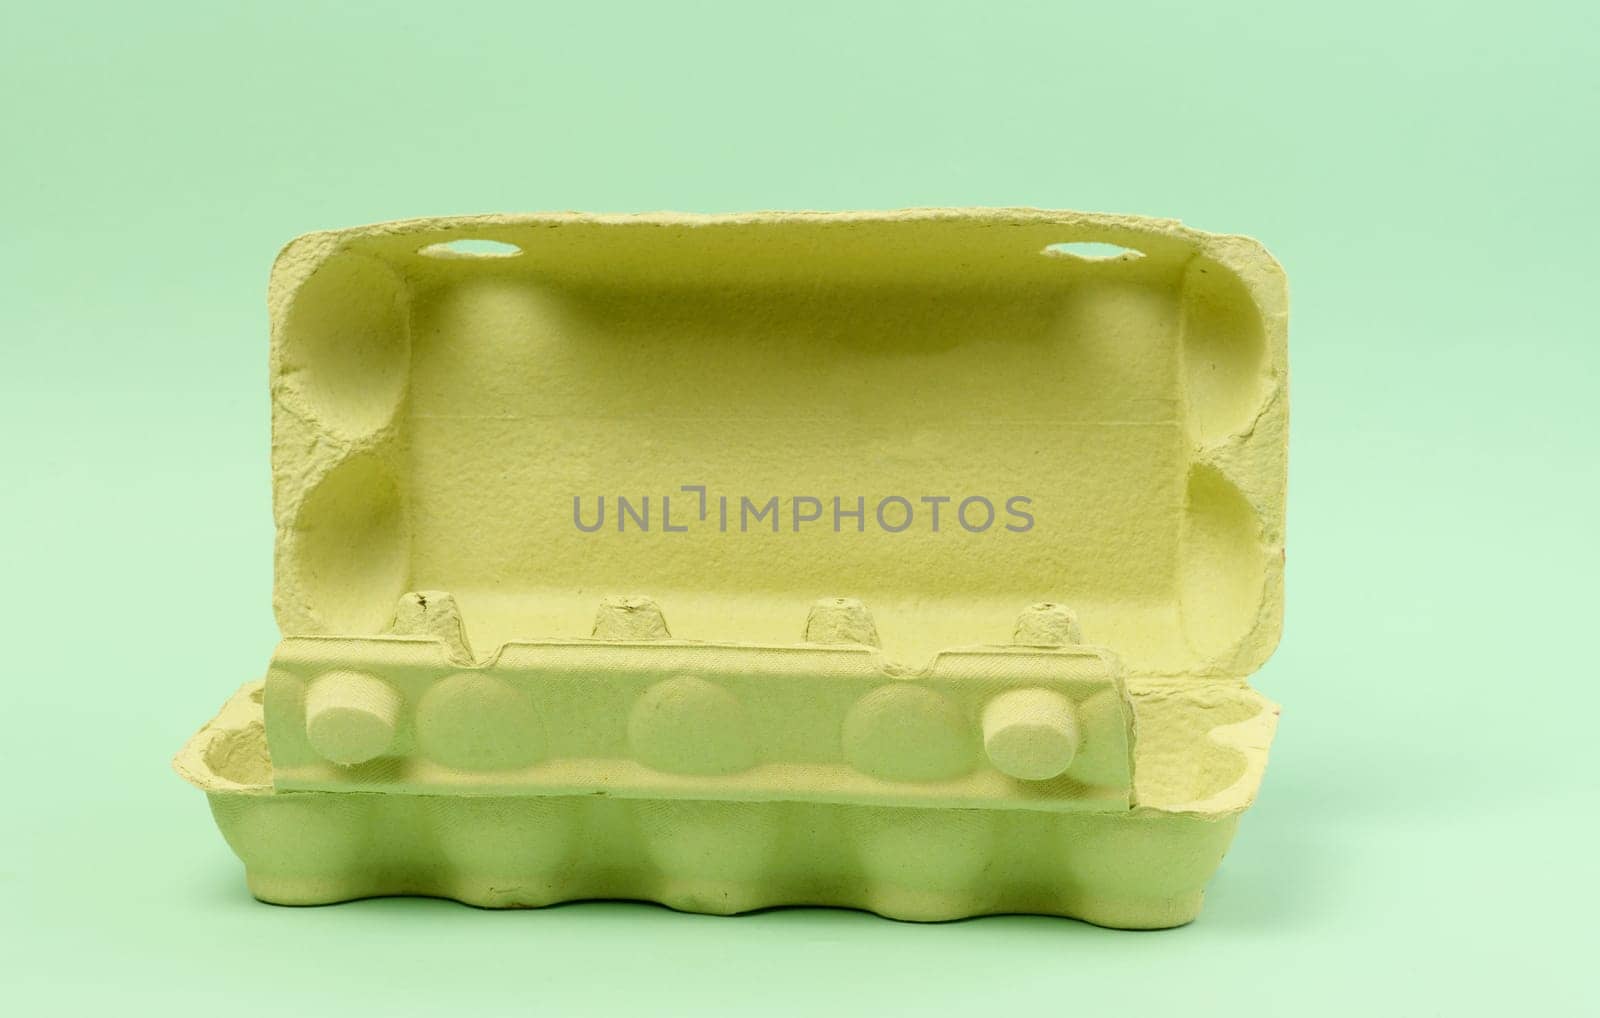 Open green recycled egg carton box on green background, storage